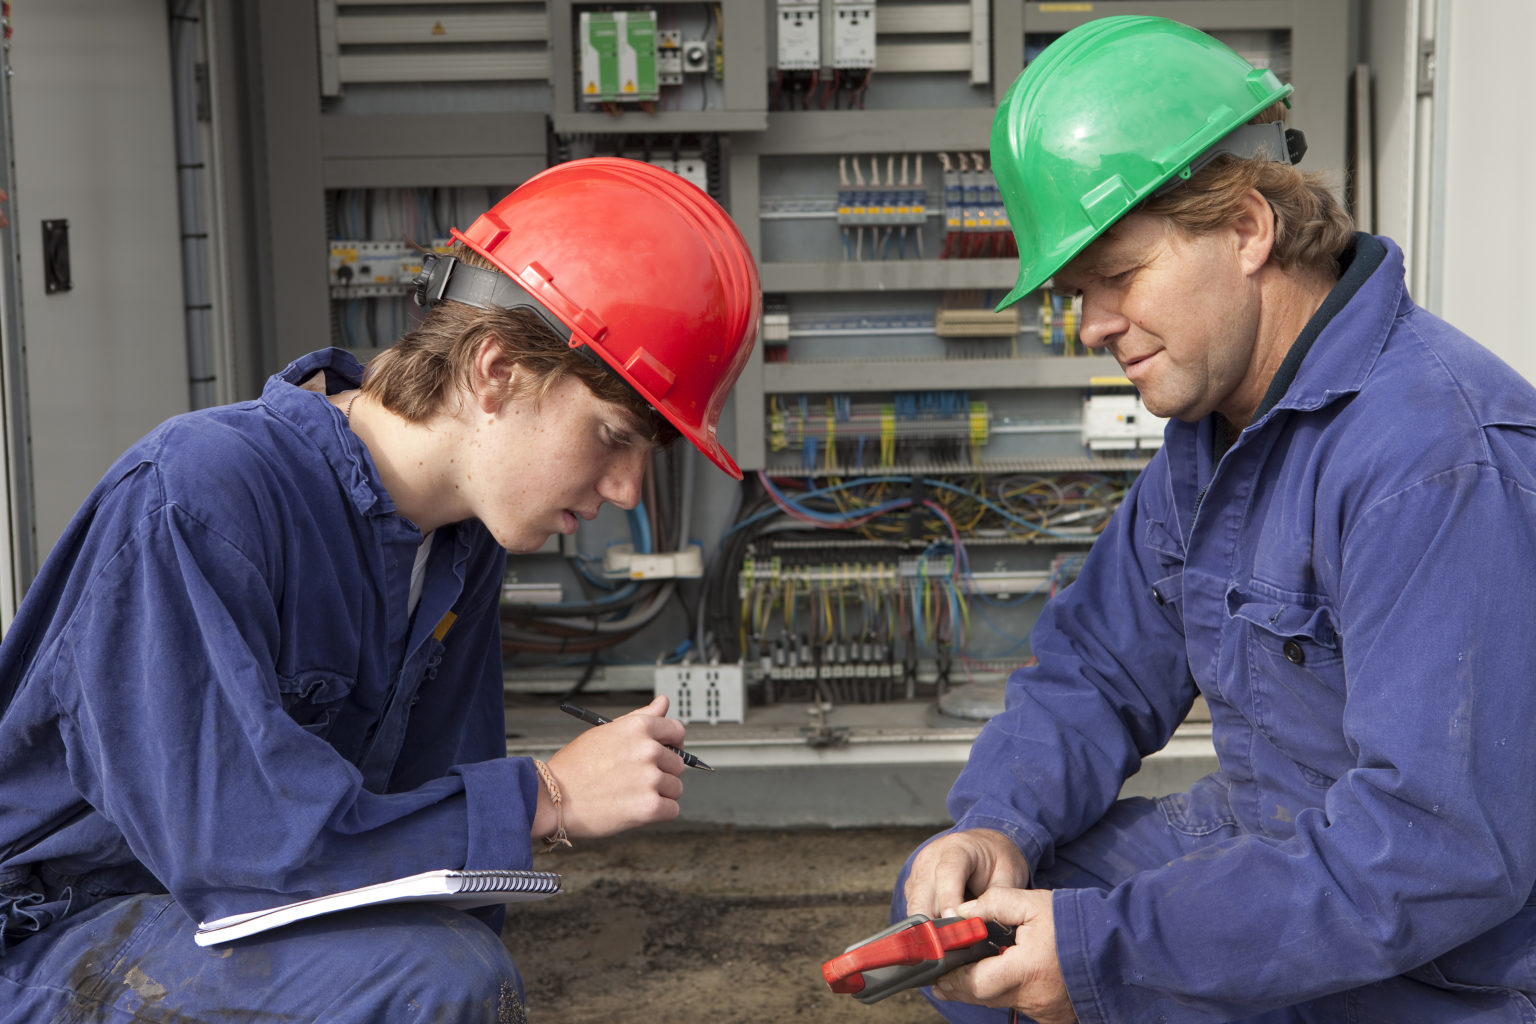 A female electrician learning from an instructor at work